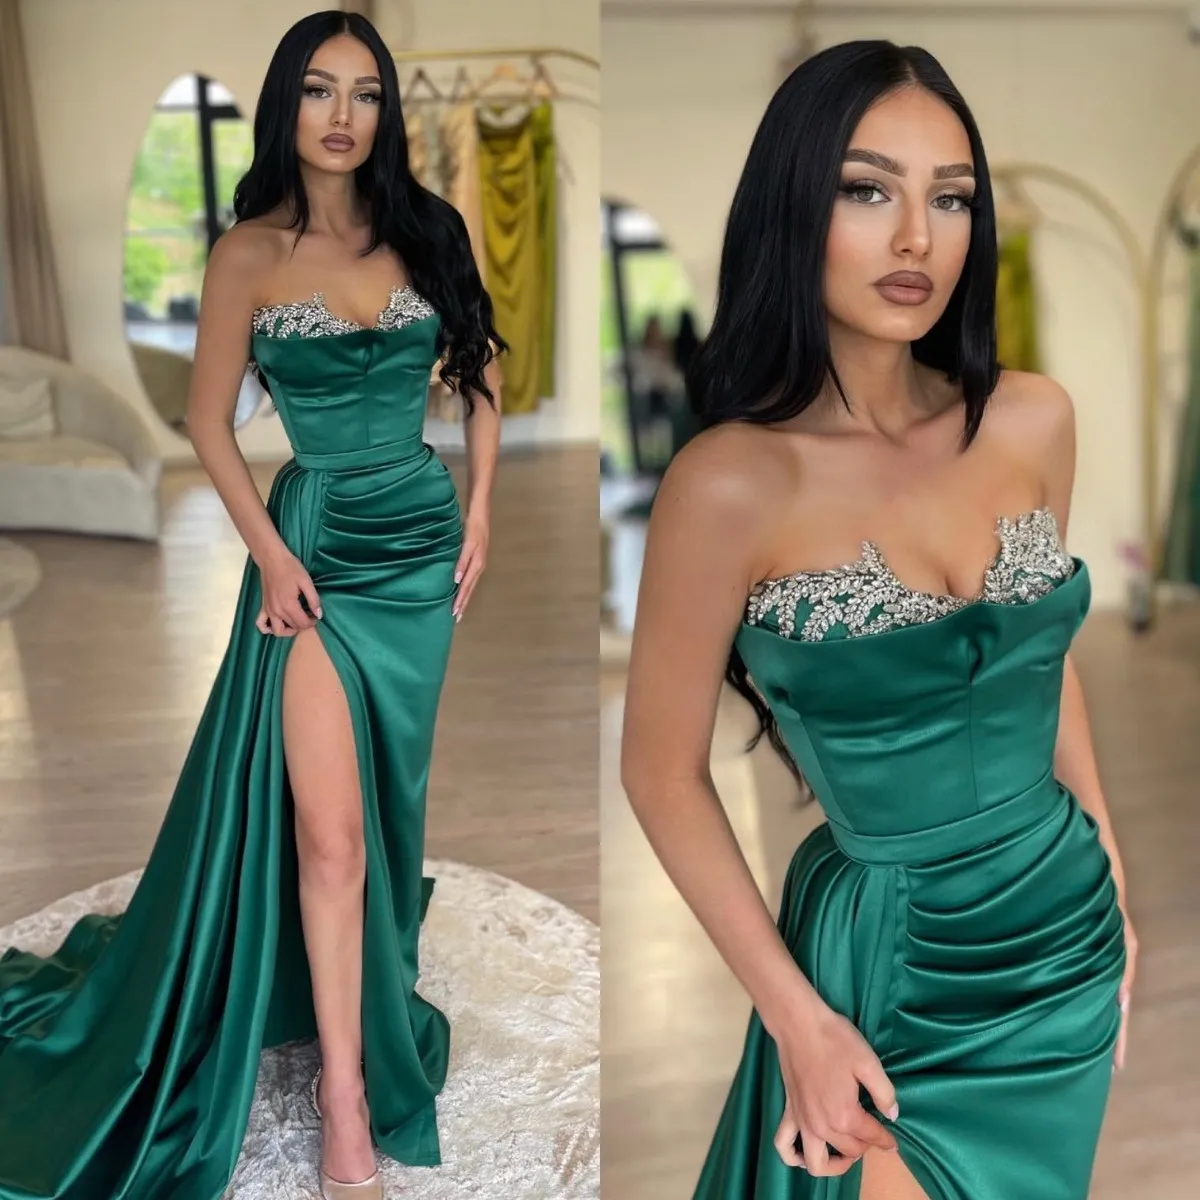 Elegant Emerald Green Prom Dresses Beads Sweetheart Party Evening Gowns Split Formal Long Special Occasion dress